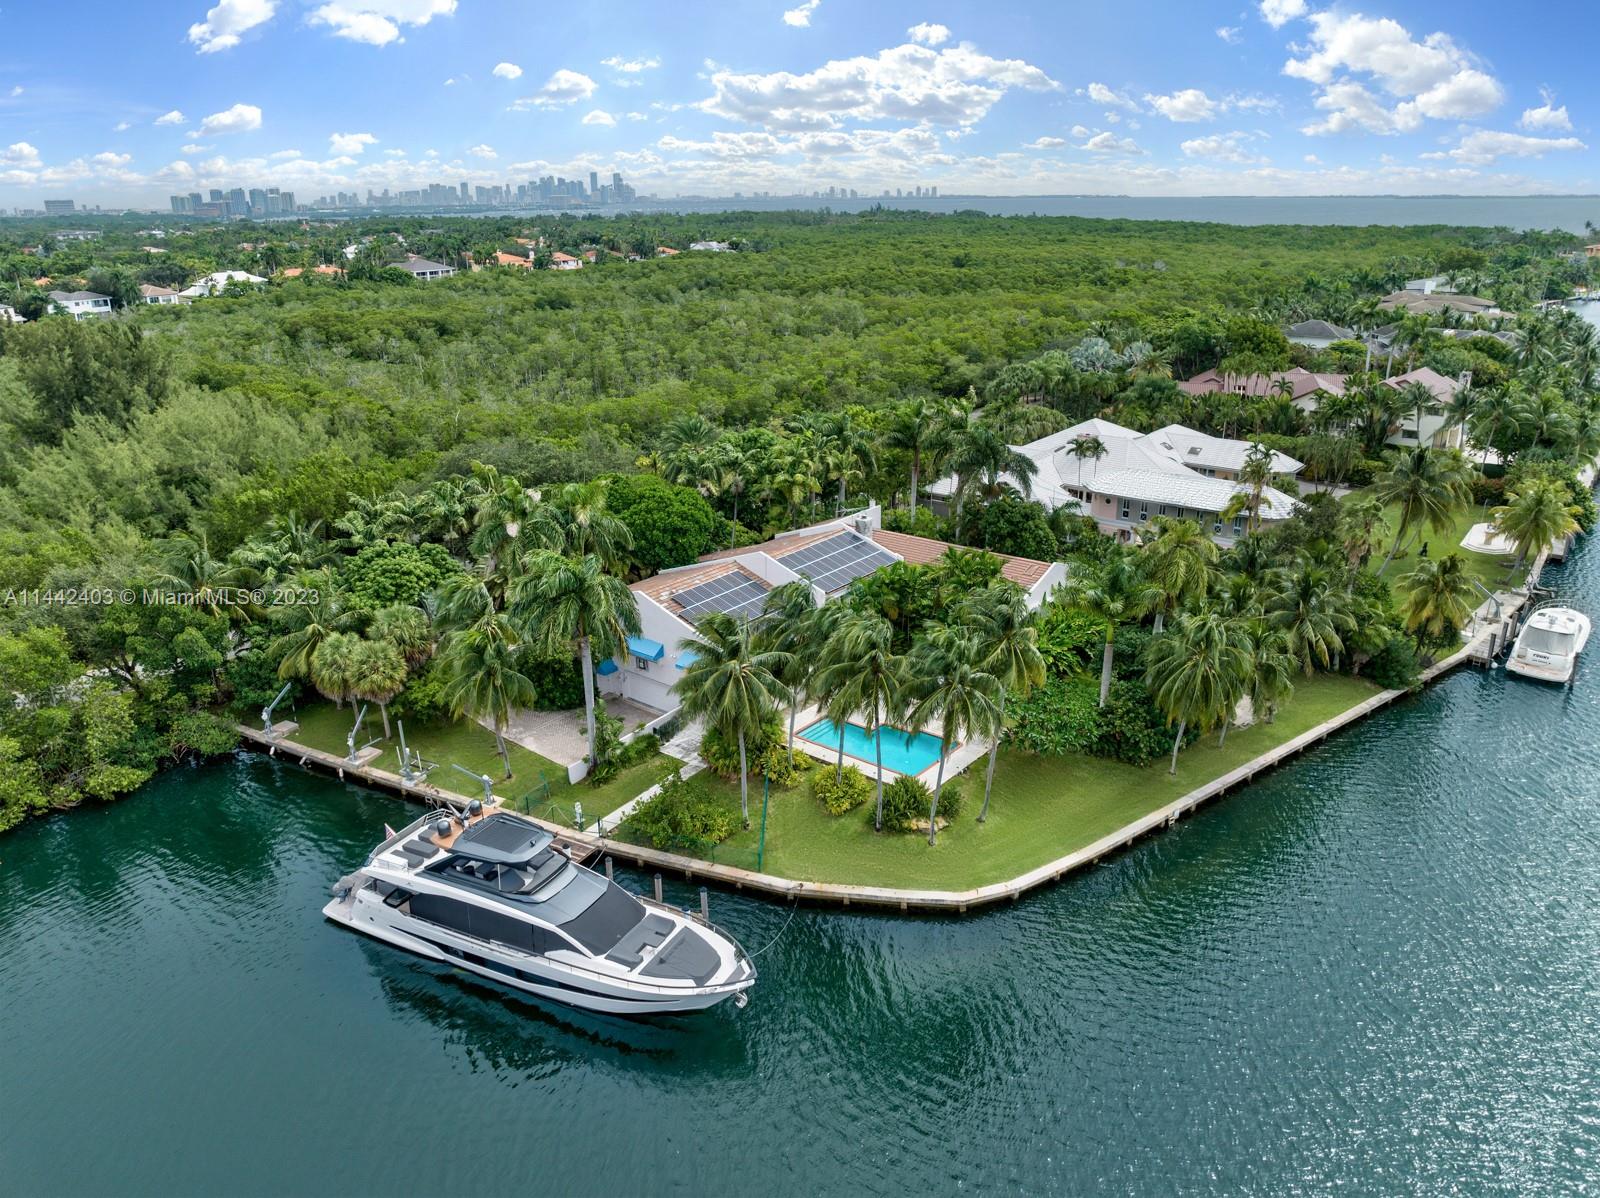 PRIME waterfront property in the exclusive gated community of Gables Estates. Expansive 1.35 acre lot boasting 400 feet of water frontage, accommodating yachts and other water vessels. Minutes from the open bay, enjoy an incredible 180 degree views of the wide waterway in your backyard. Property has plans for 10,000+ square foot custom estate by Cesar Molina. Great opportunity to build your dream home! Call listing agent for more information.